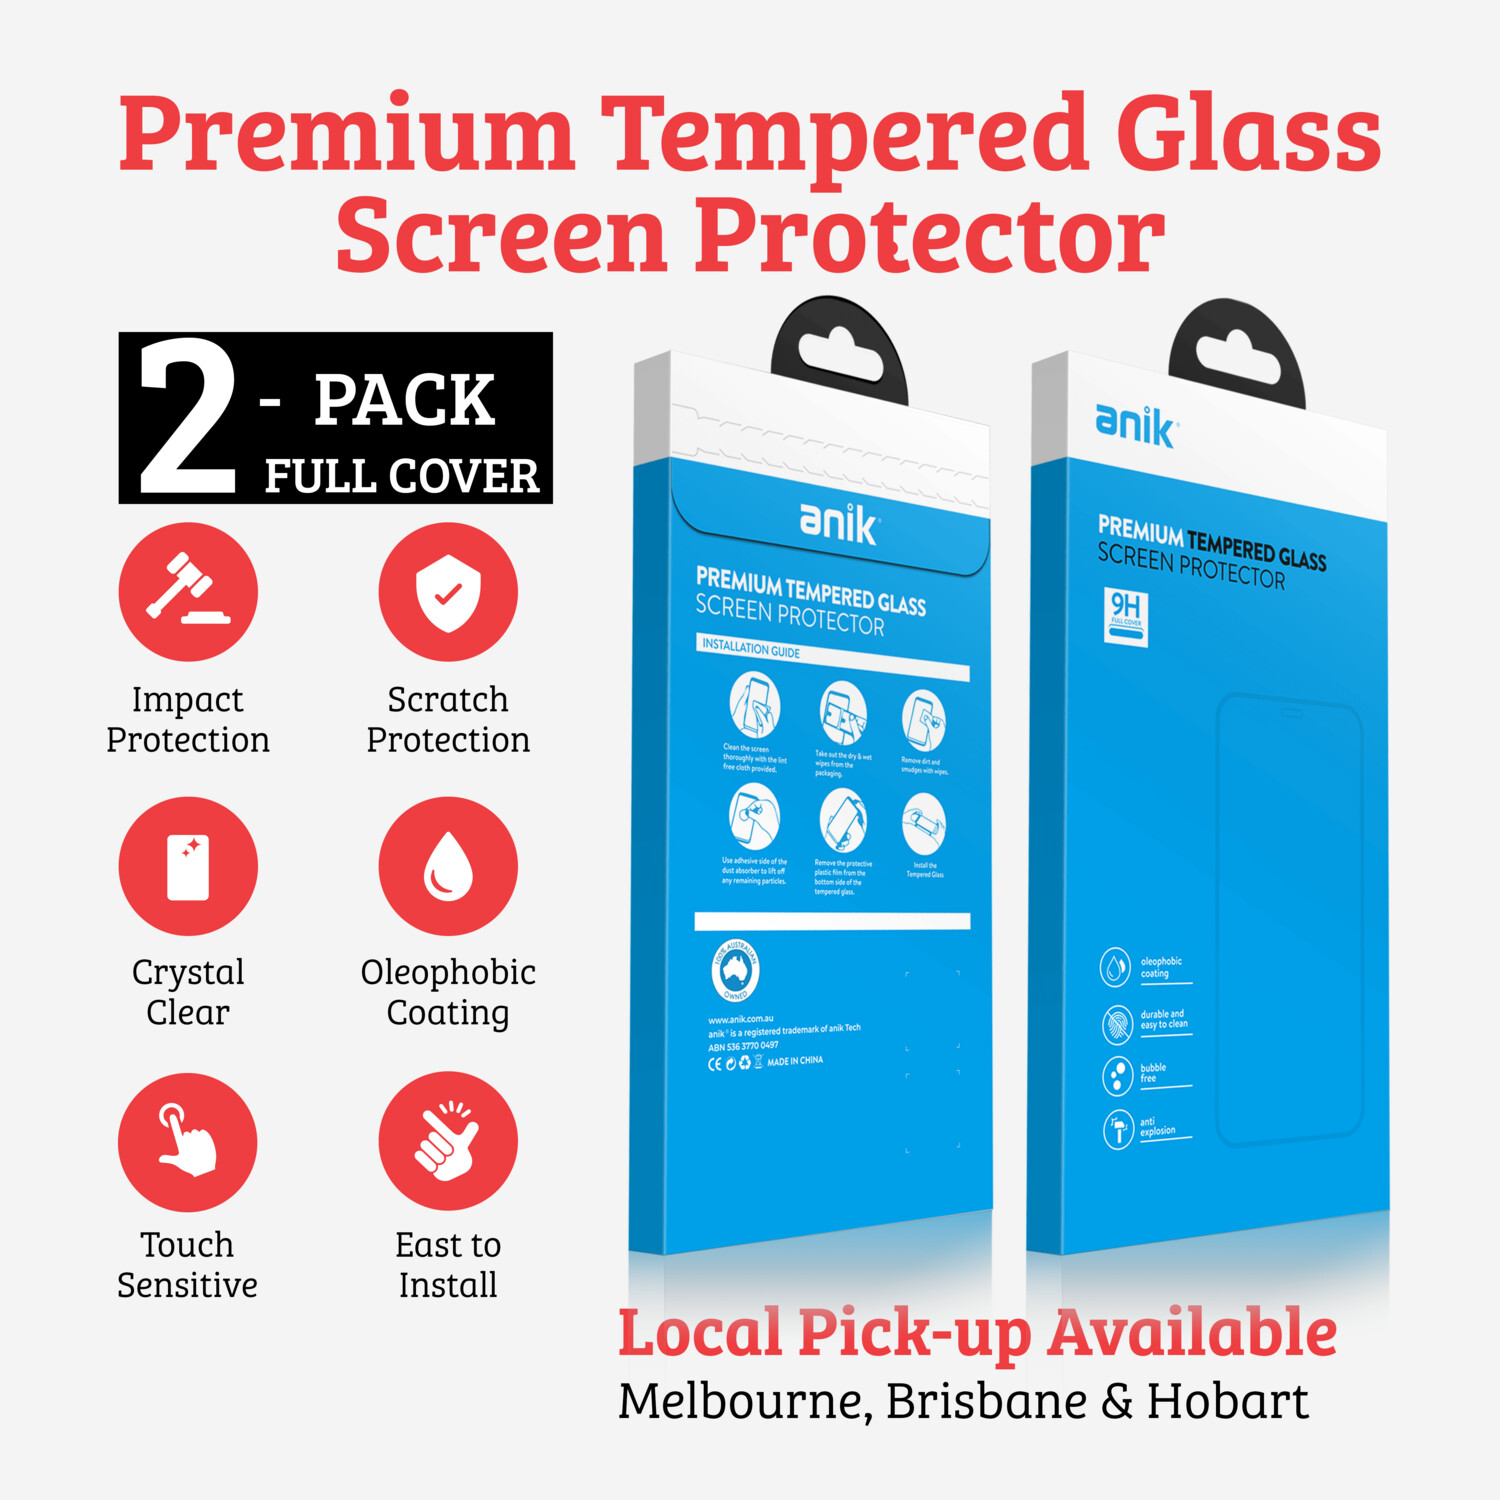 ANIK Premium Full Cover Tempered Glass Screen Protector for iPhone 7 [2 Pack]